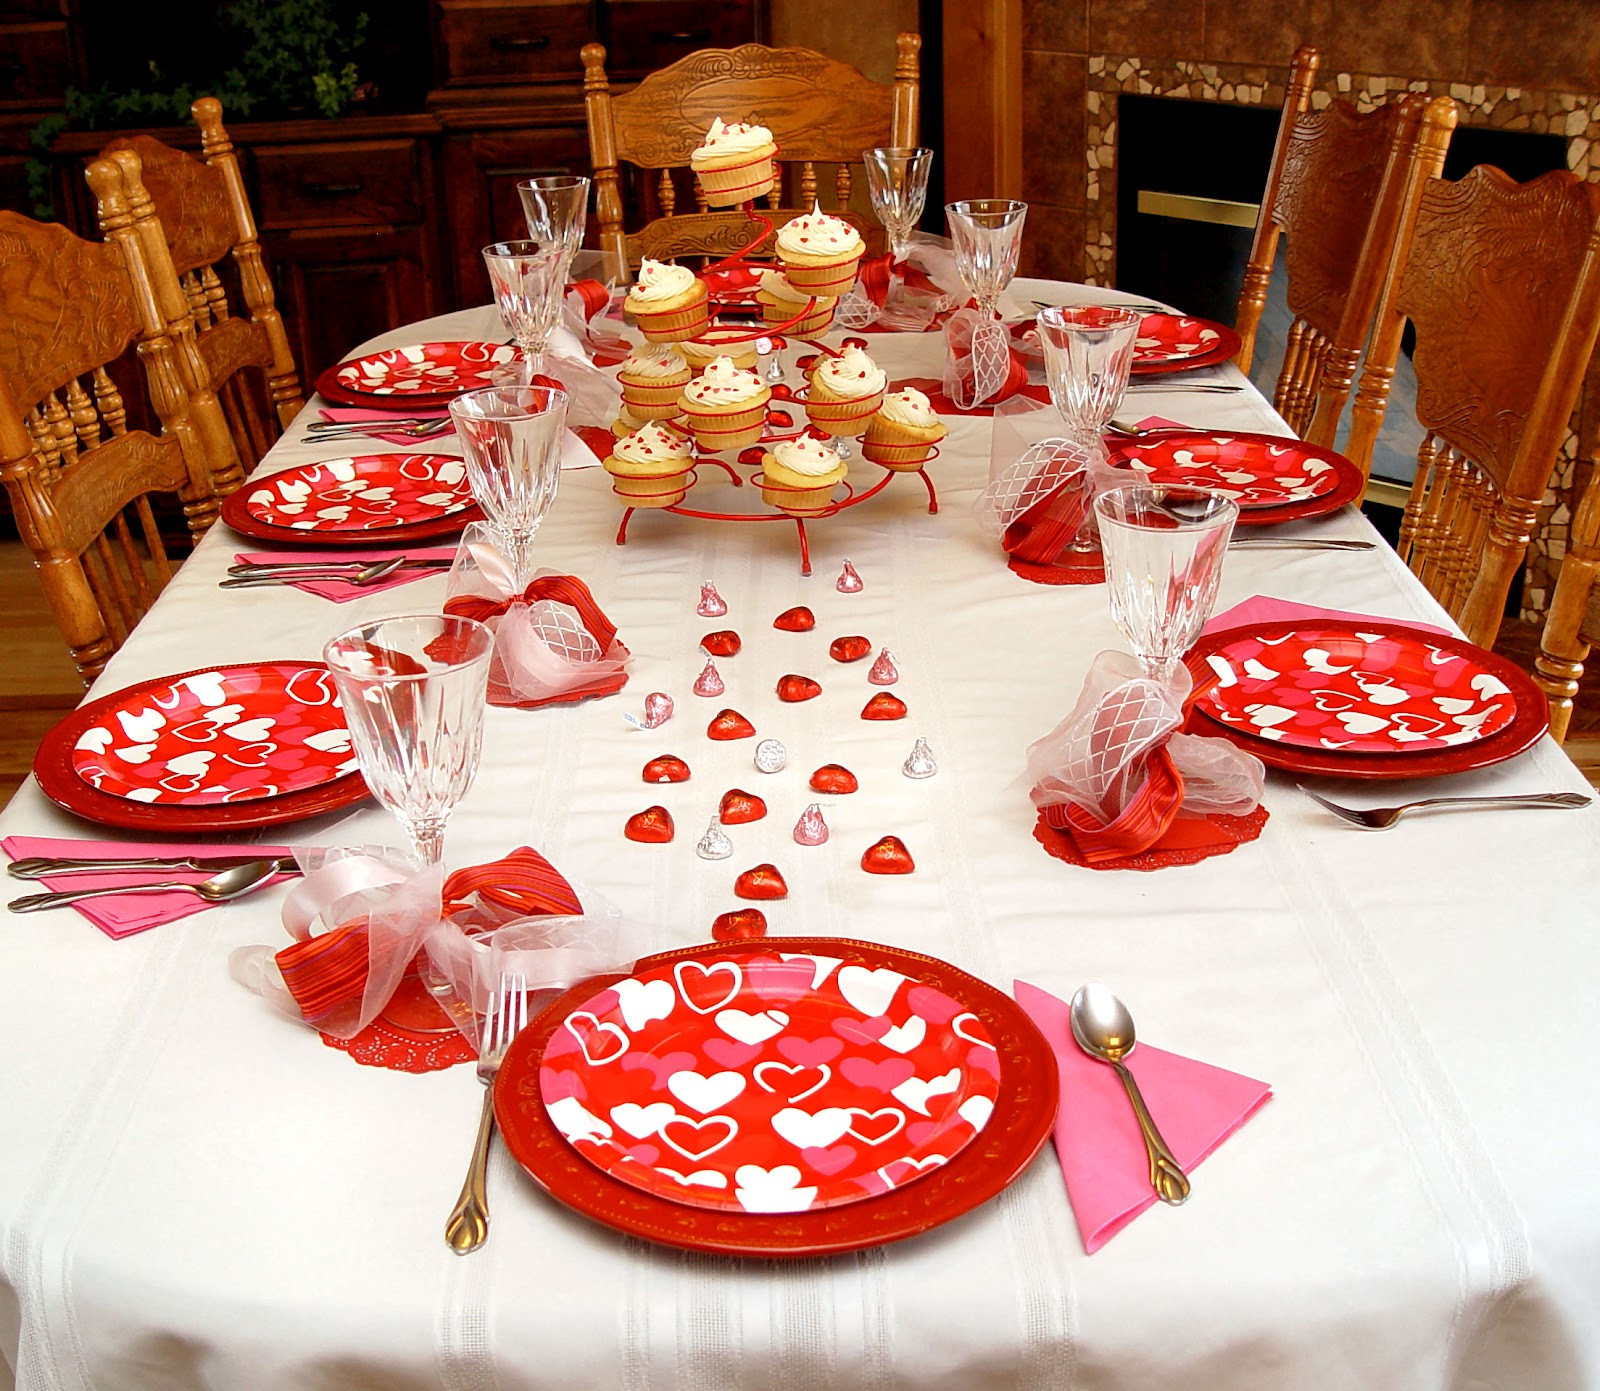 Valentine'S Dinner Ideas For Family
 Family Valentines Dinner Idea and How To Make A Junk Bow